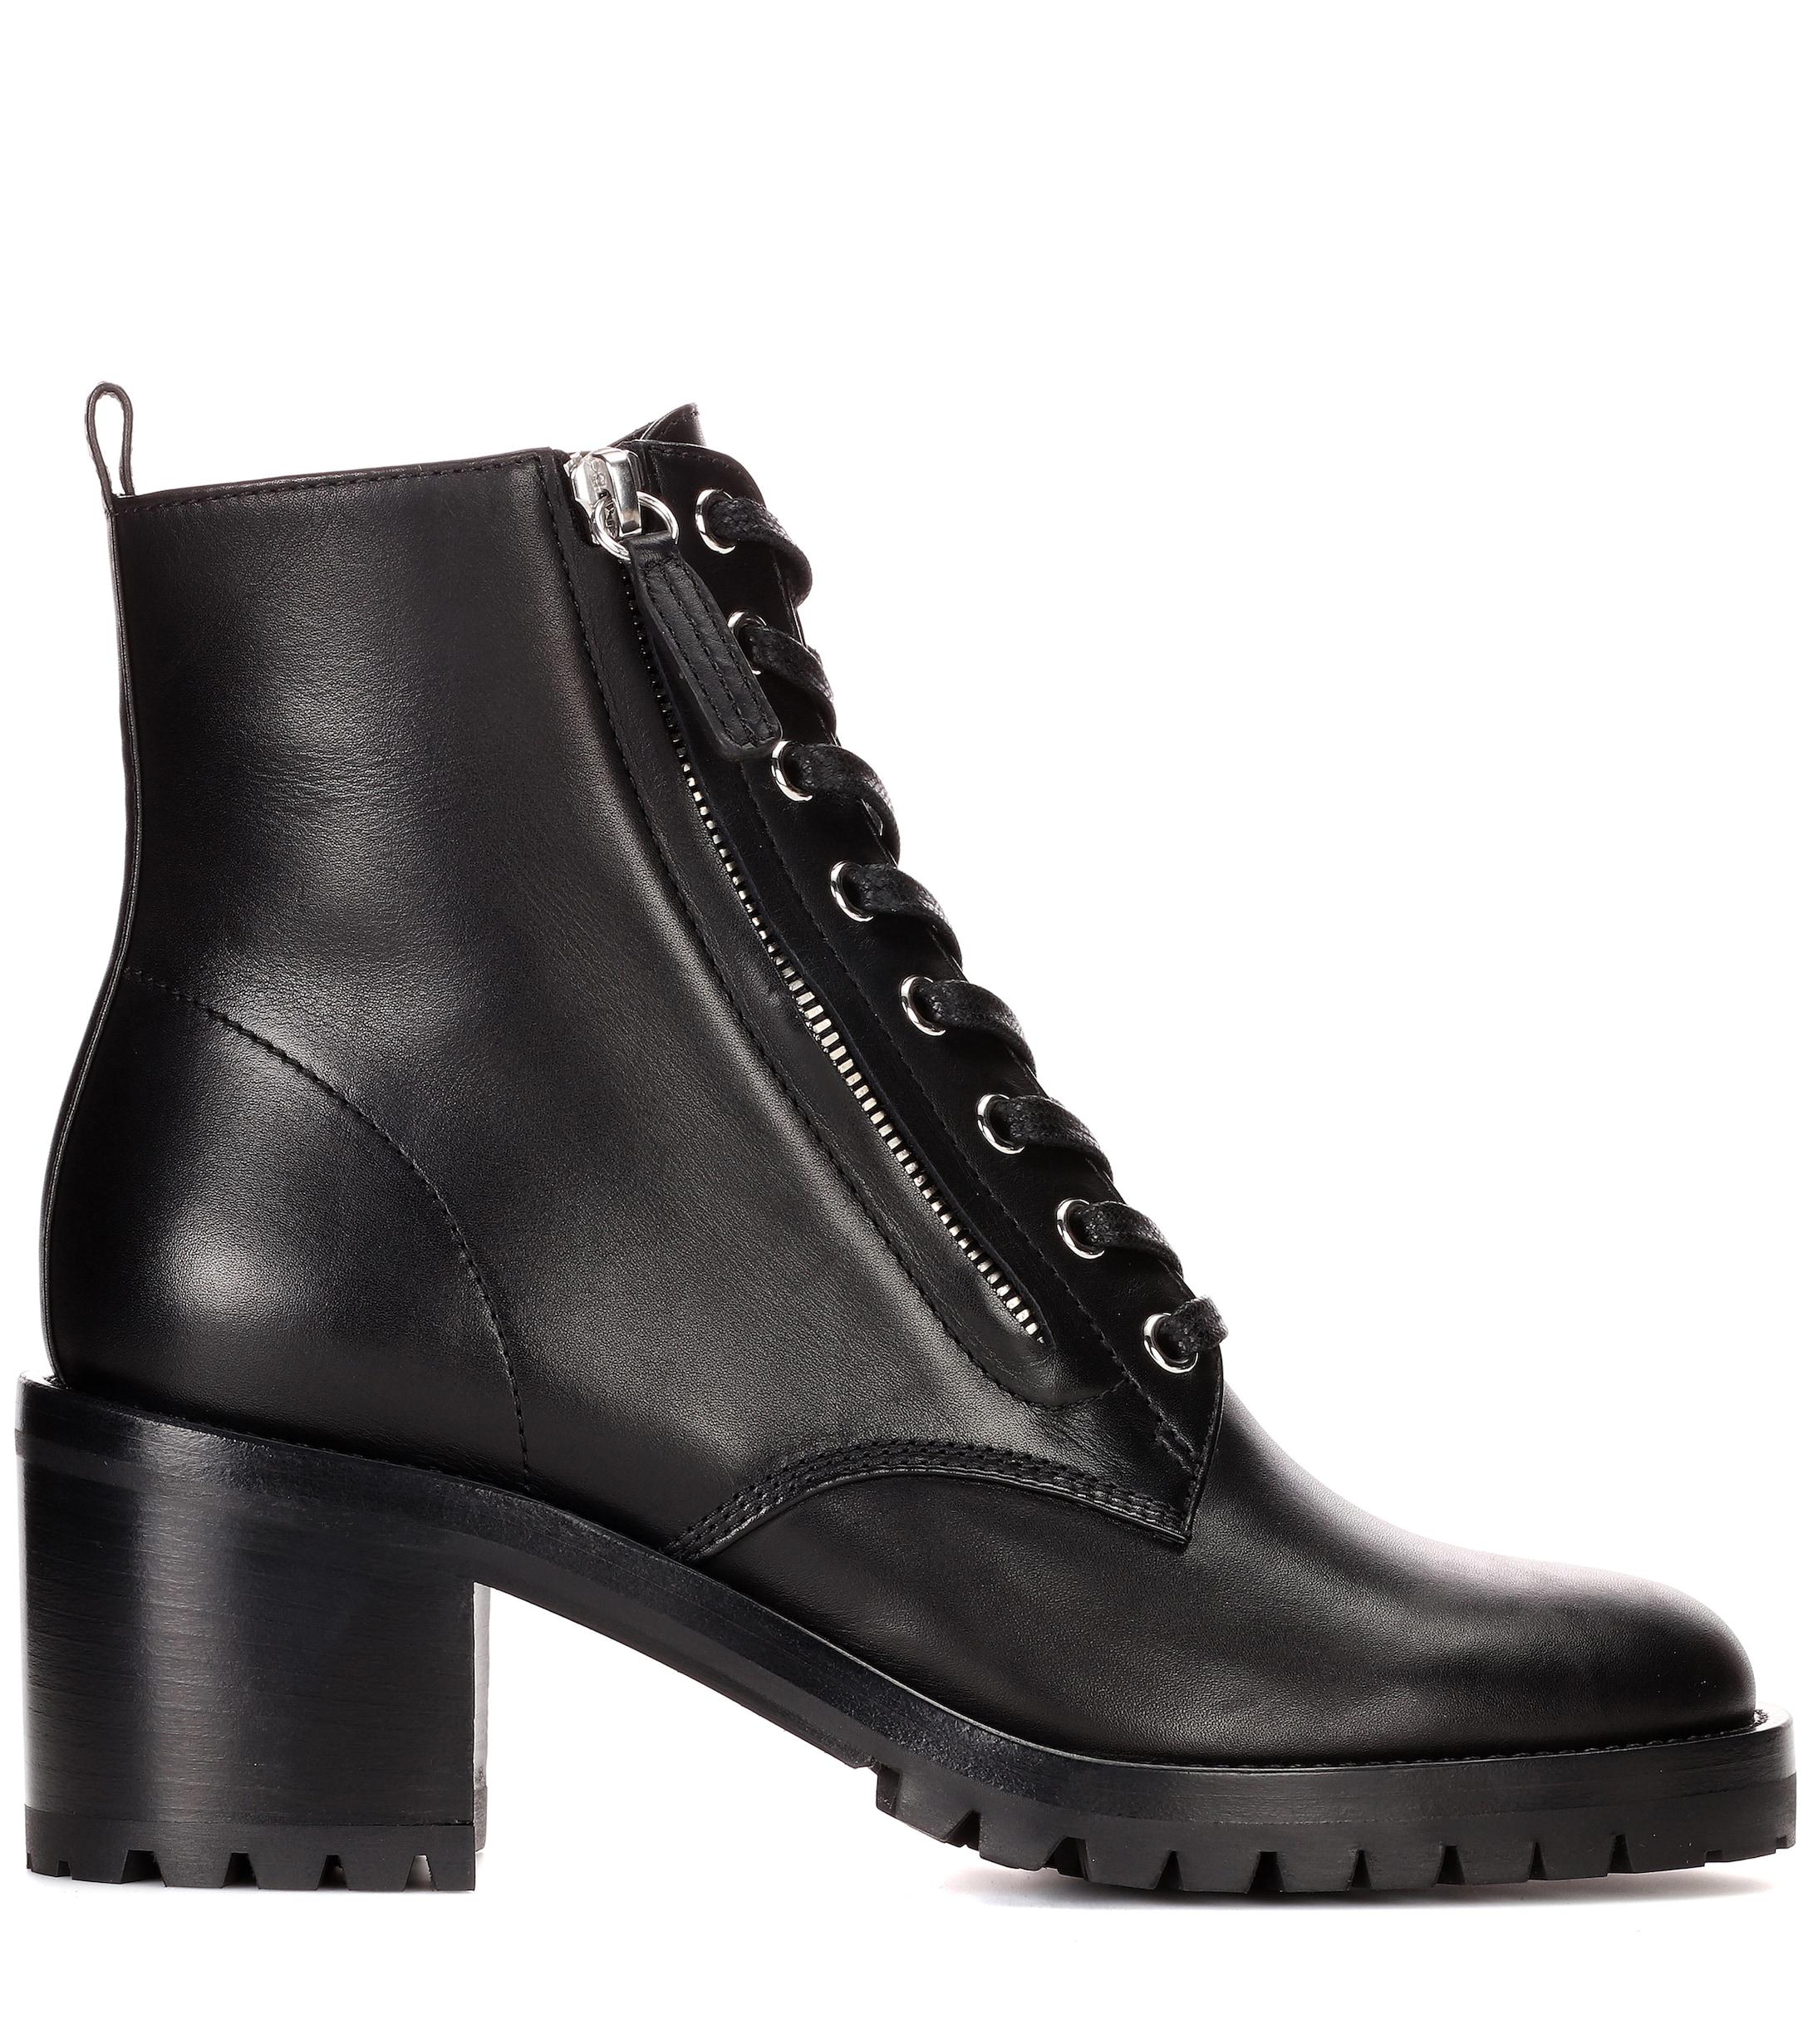 Gianvito Rossi Croft Leather Ankle Boots in Black - Lyst